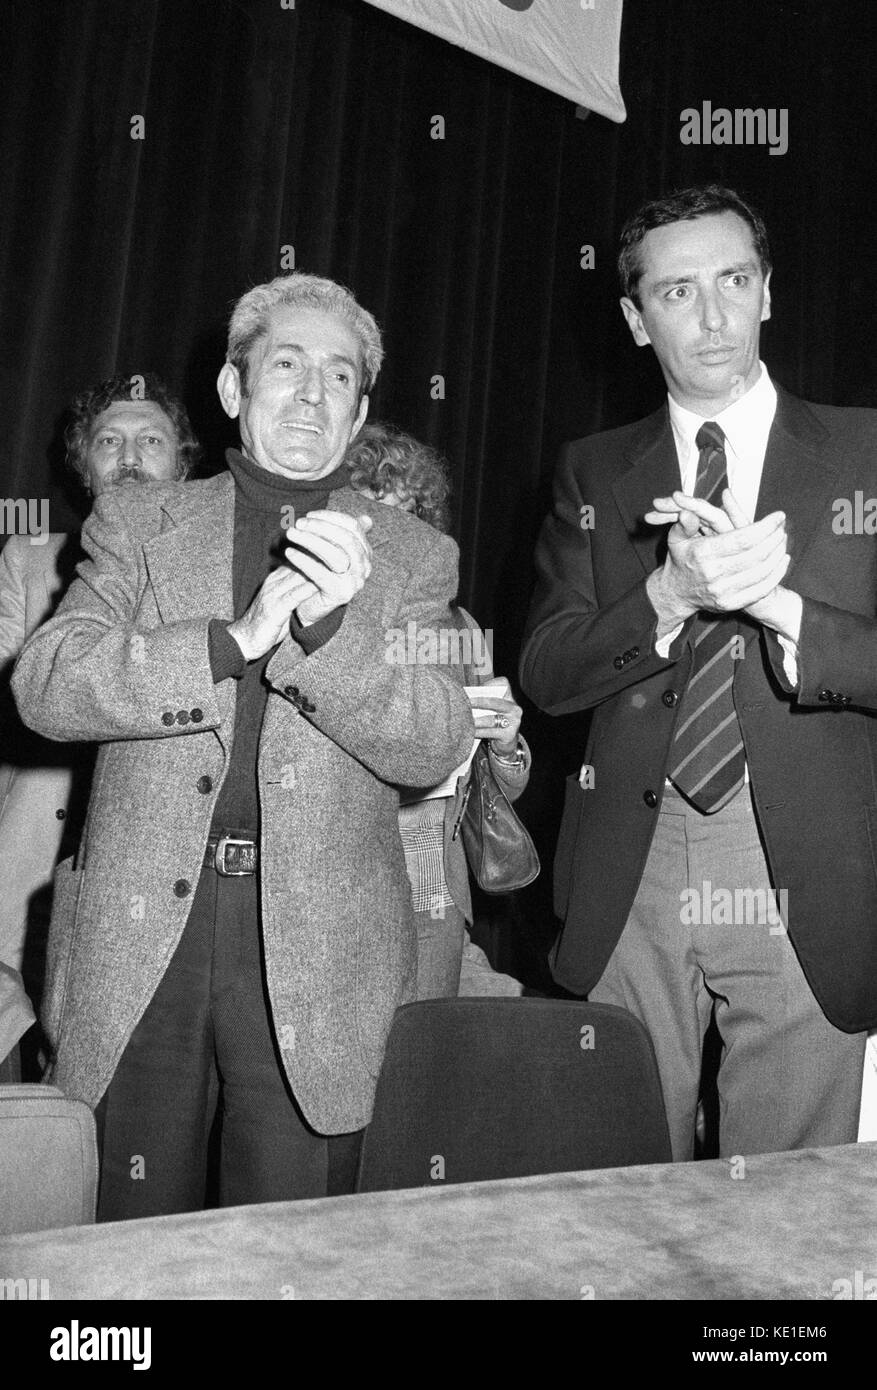 Marcelino Camacho, historical leader of the Spanish leading trade union Comisiones Obreras (CCOO - Workers' Commissions) and member of the Spanish Communist Party with Lucio De Carlini, secretary of the Milano Chamber of Labour - Milan (Italy) 1976 Stock Photo